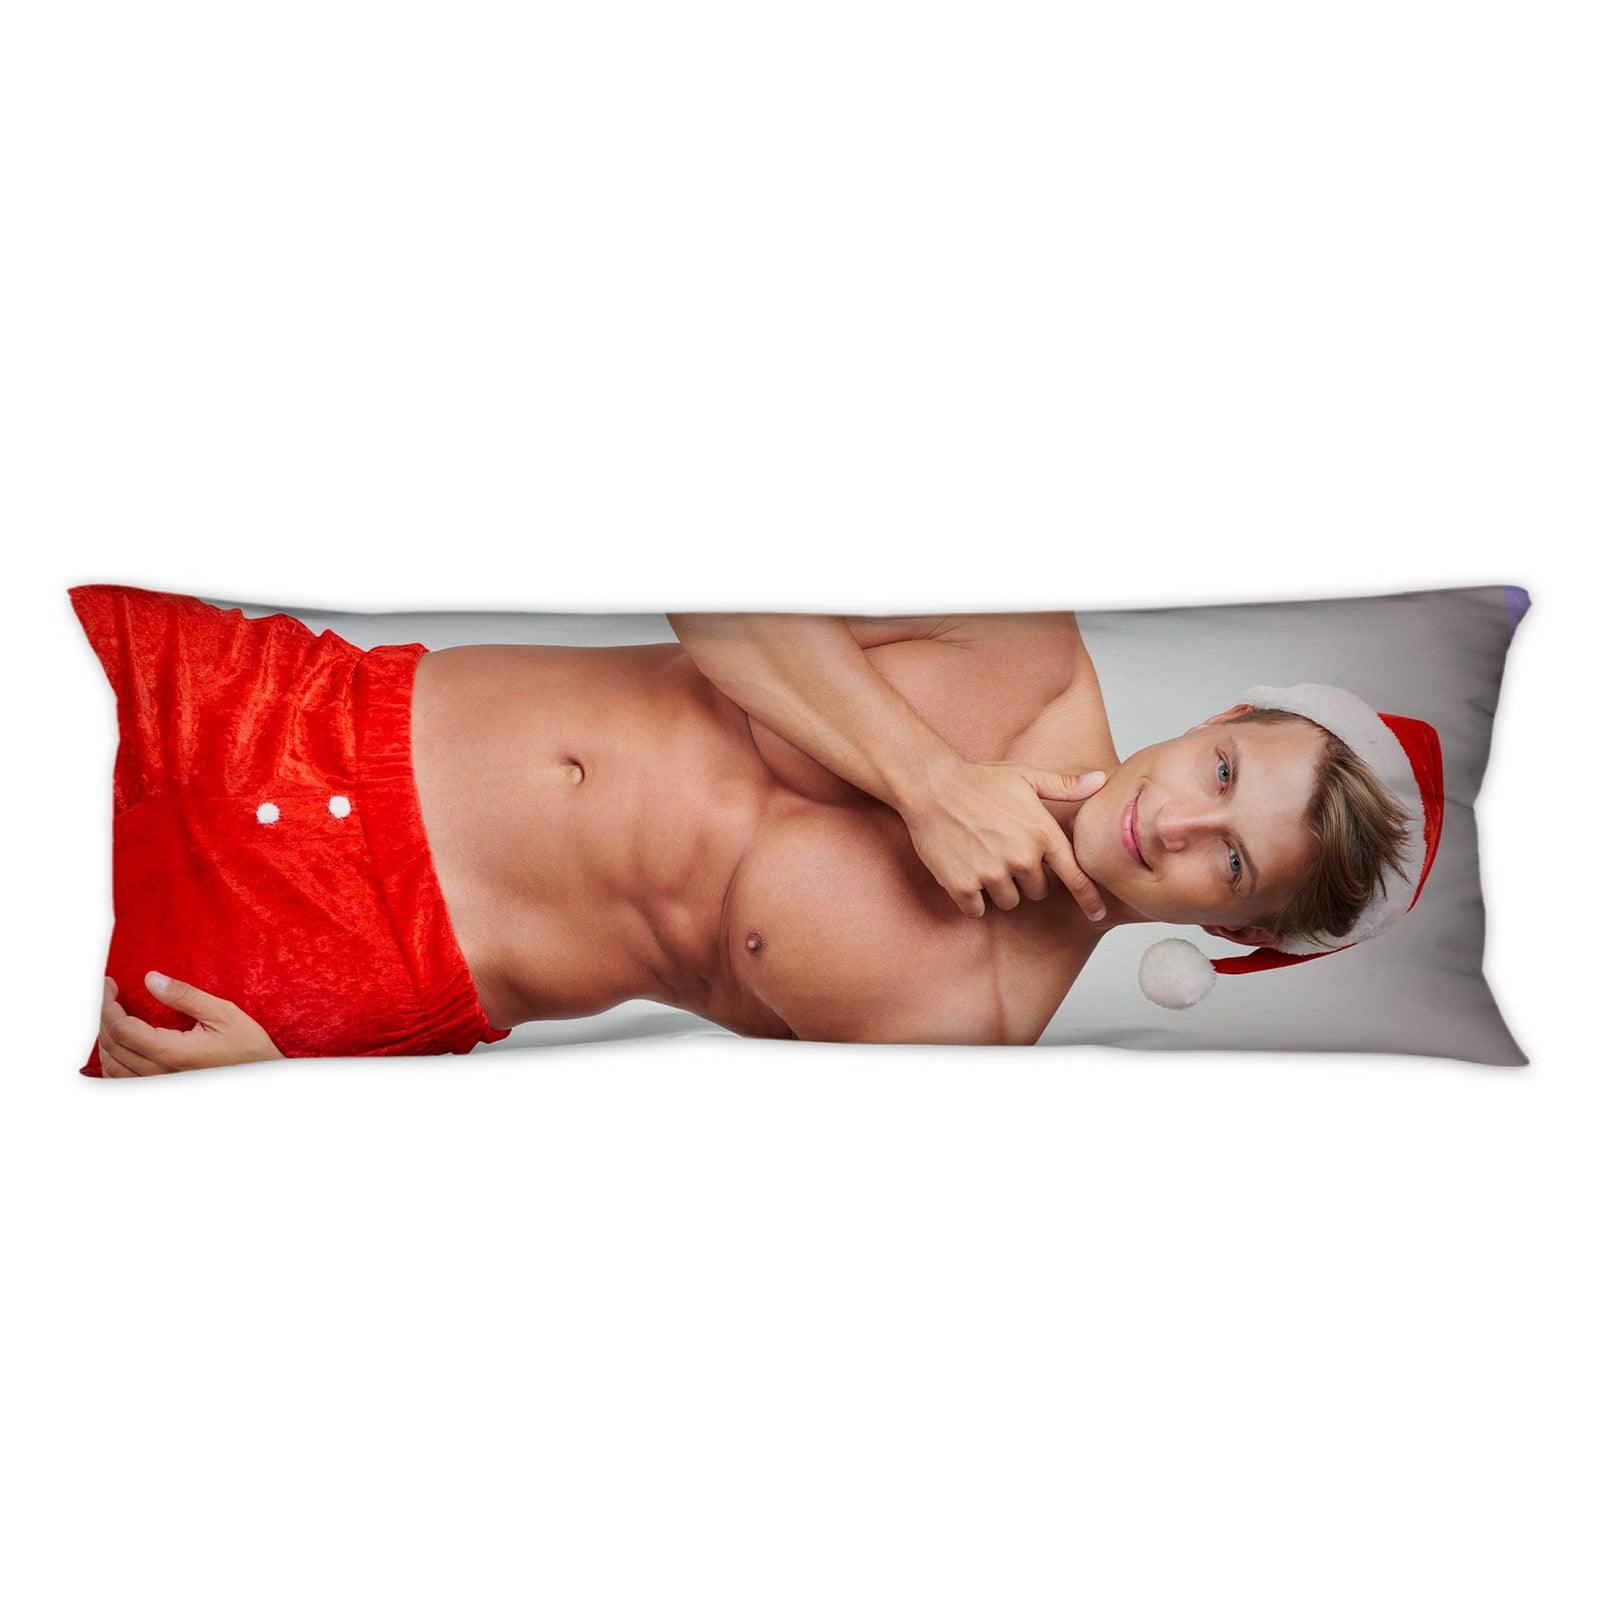 Custom Photo Body Pillow Custom Photo Body Pillow - undefined - Qstomize.com